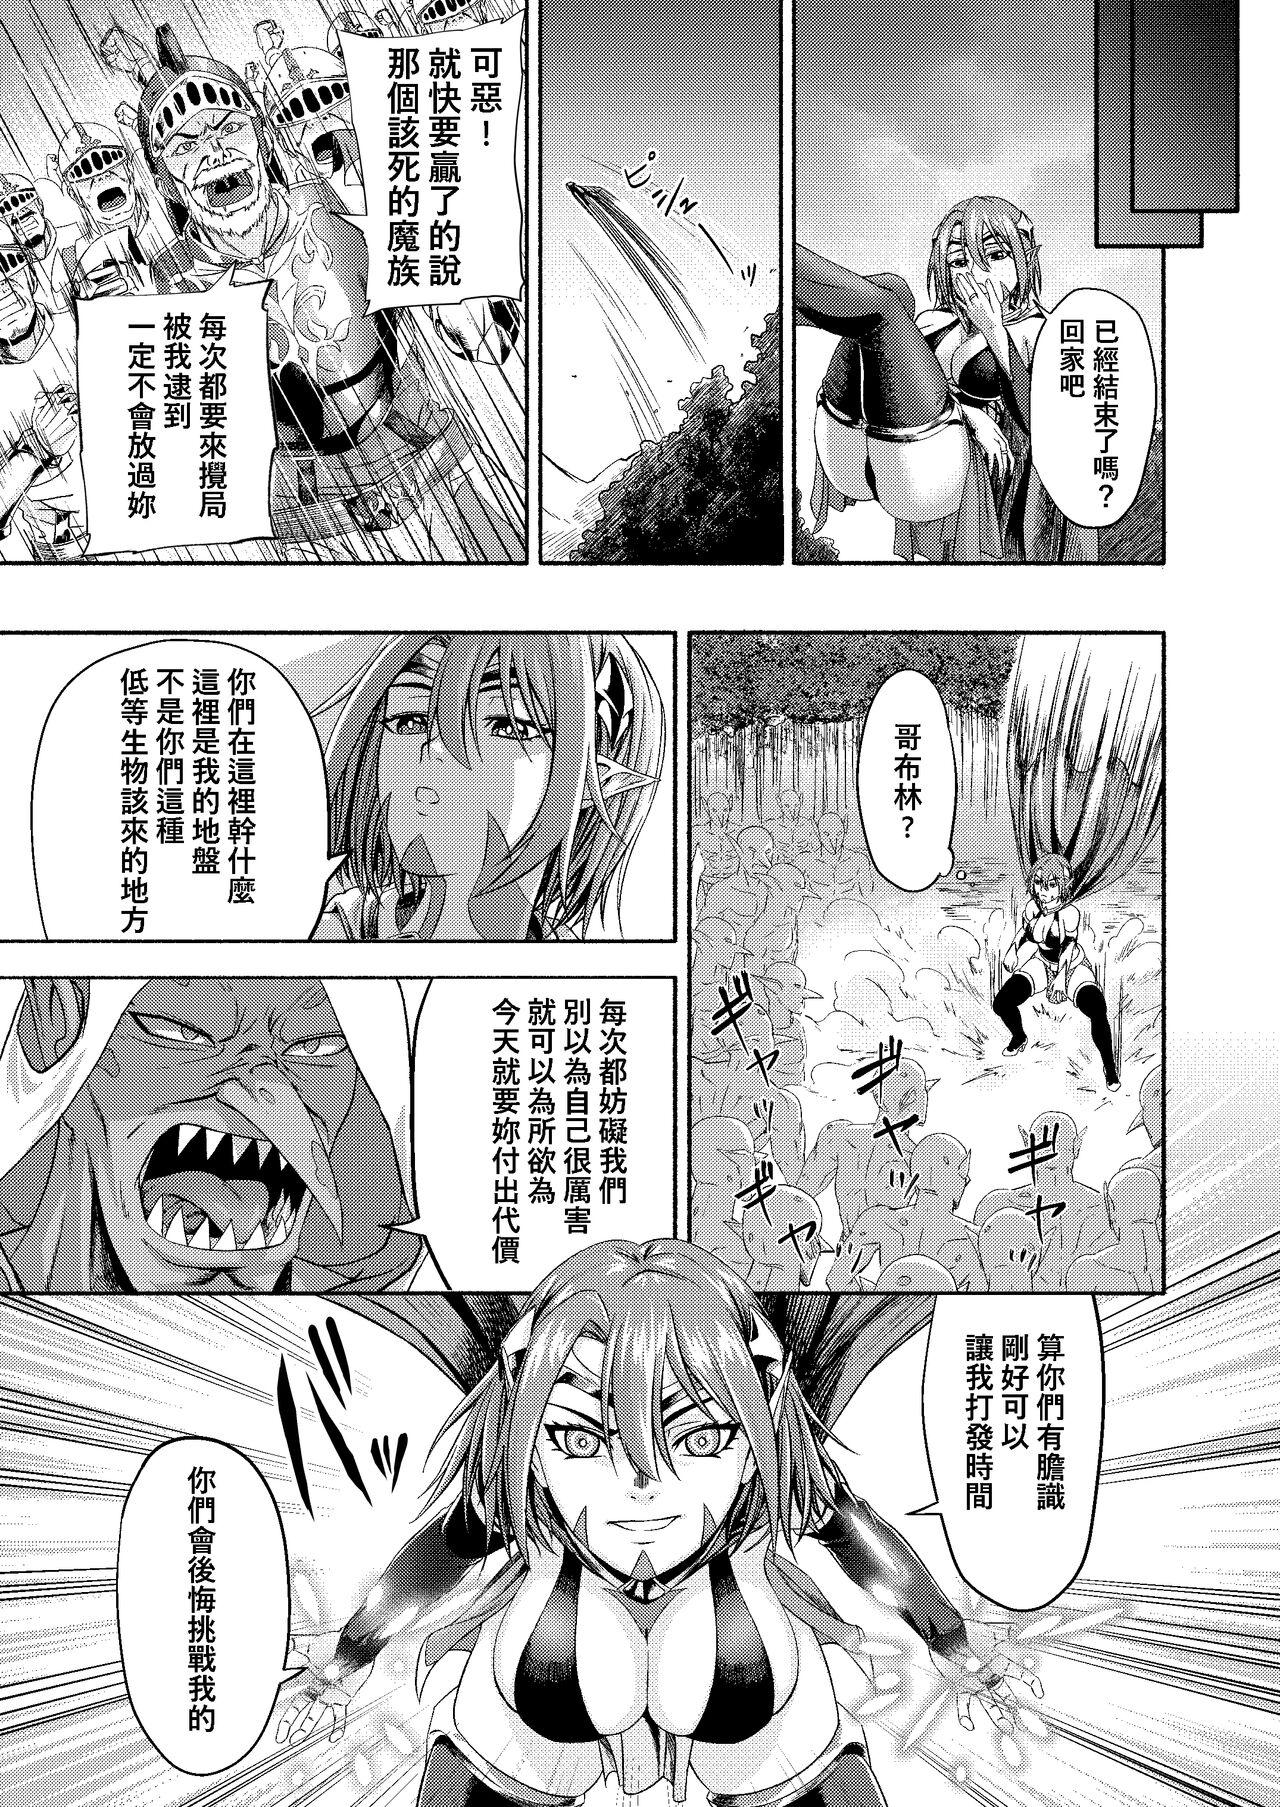 Perra Millennium Livestock-Candidate Demon King falls on Goblin Onaho Real Amatuer Porn - Page 5